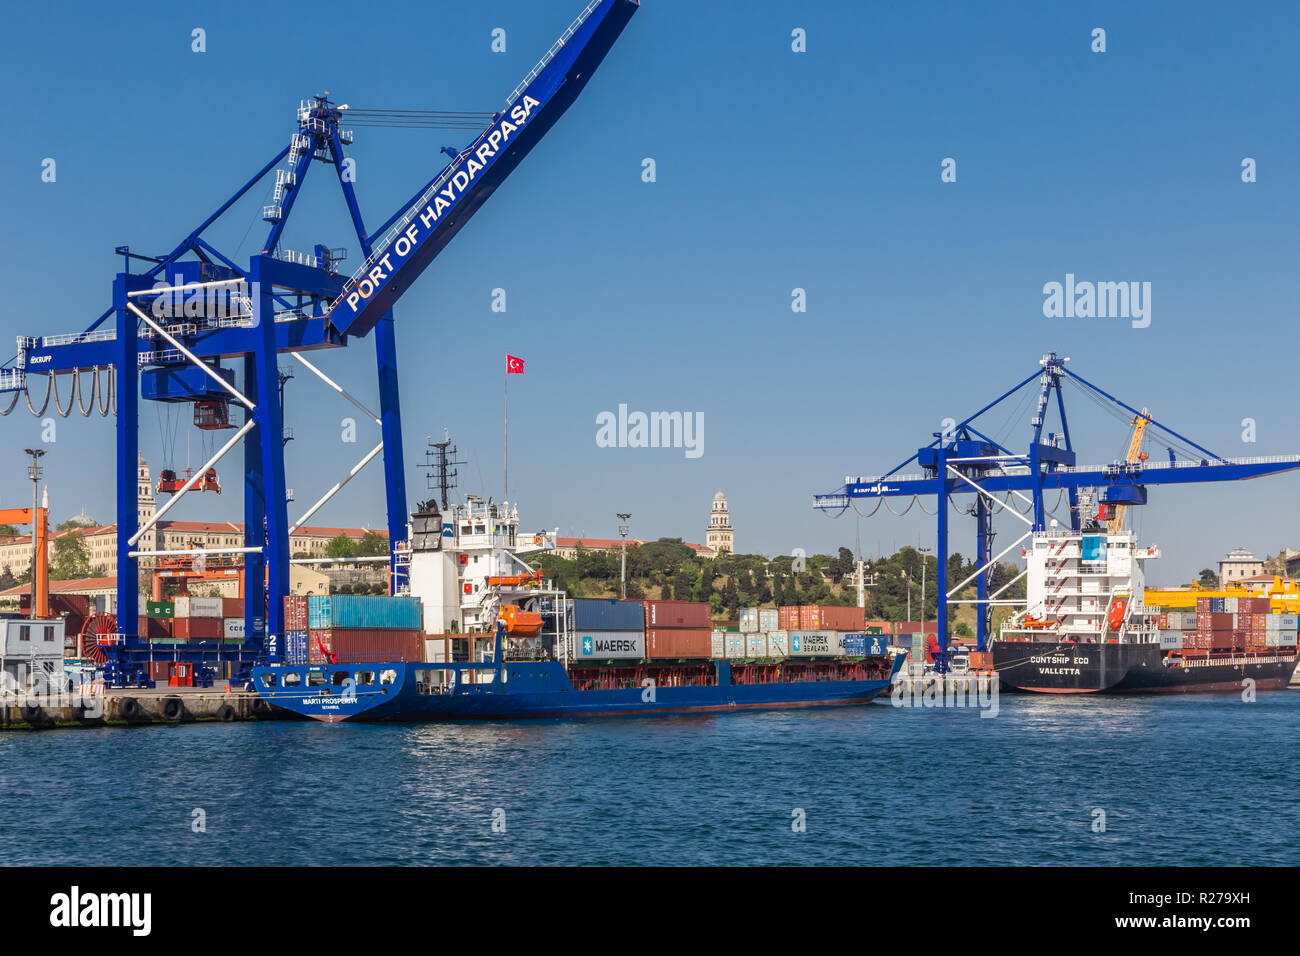 Istanbul, Turkey, April 29, 2013: View of Haydarpasa Container  Terminal, showing cranes and container ships. Stock Photo